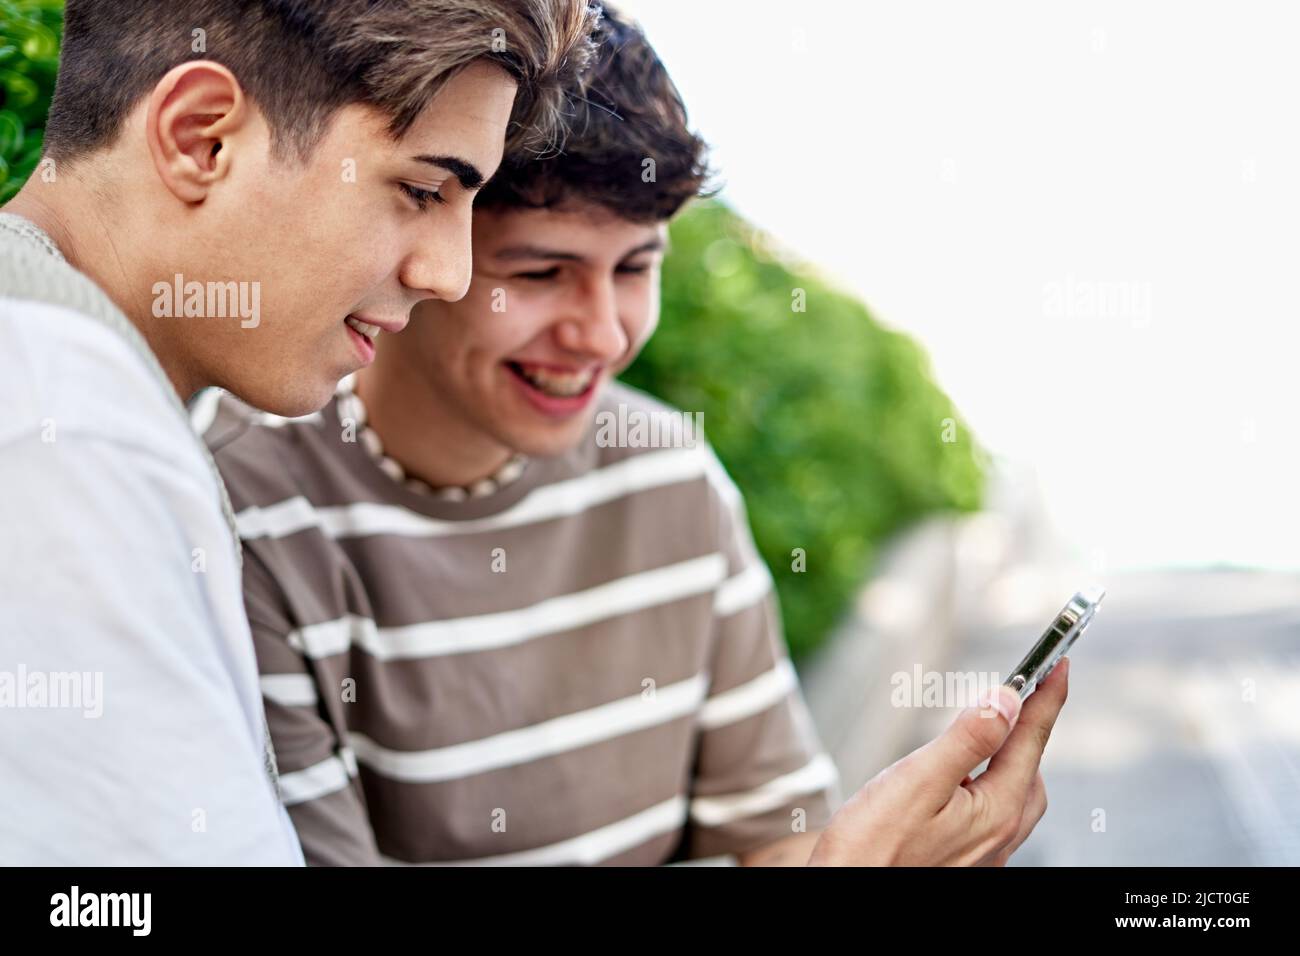 Man Shows His Boyfriend A Video On His Phone Stock Photo